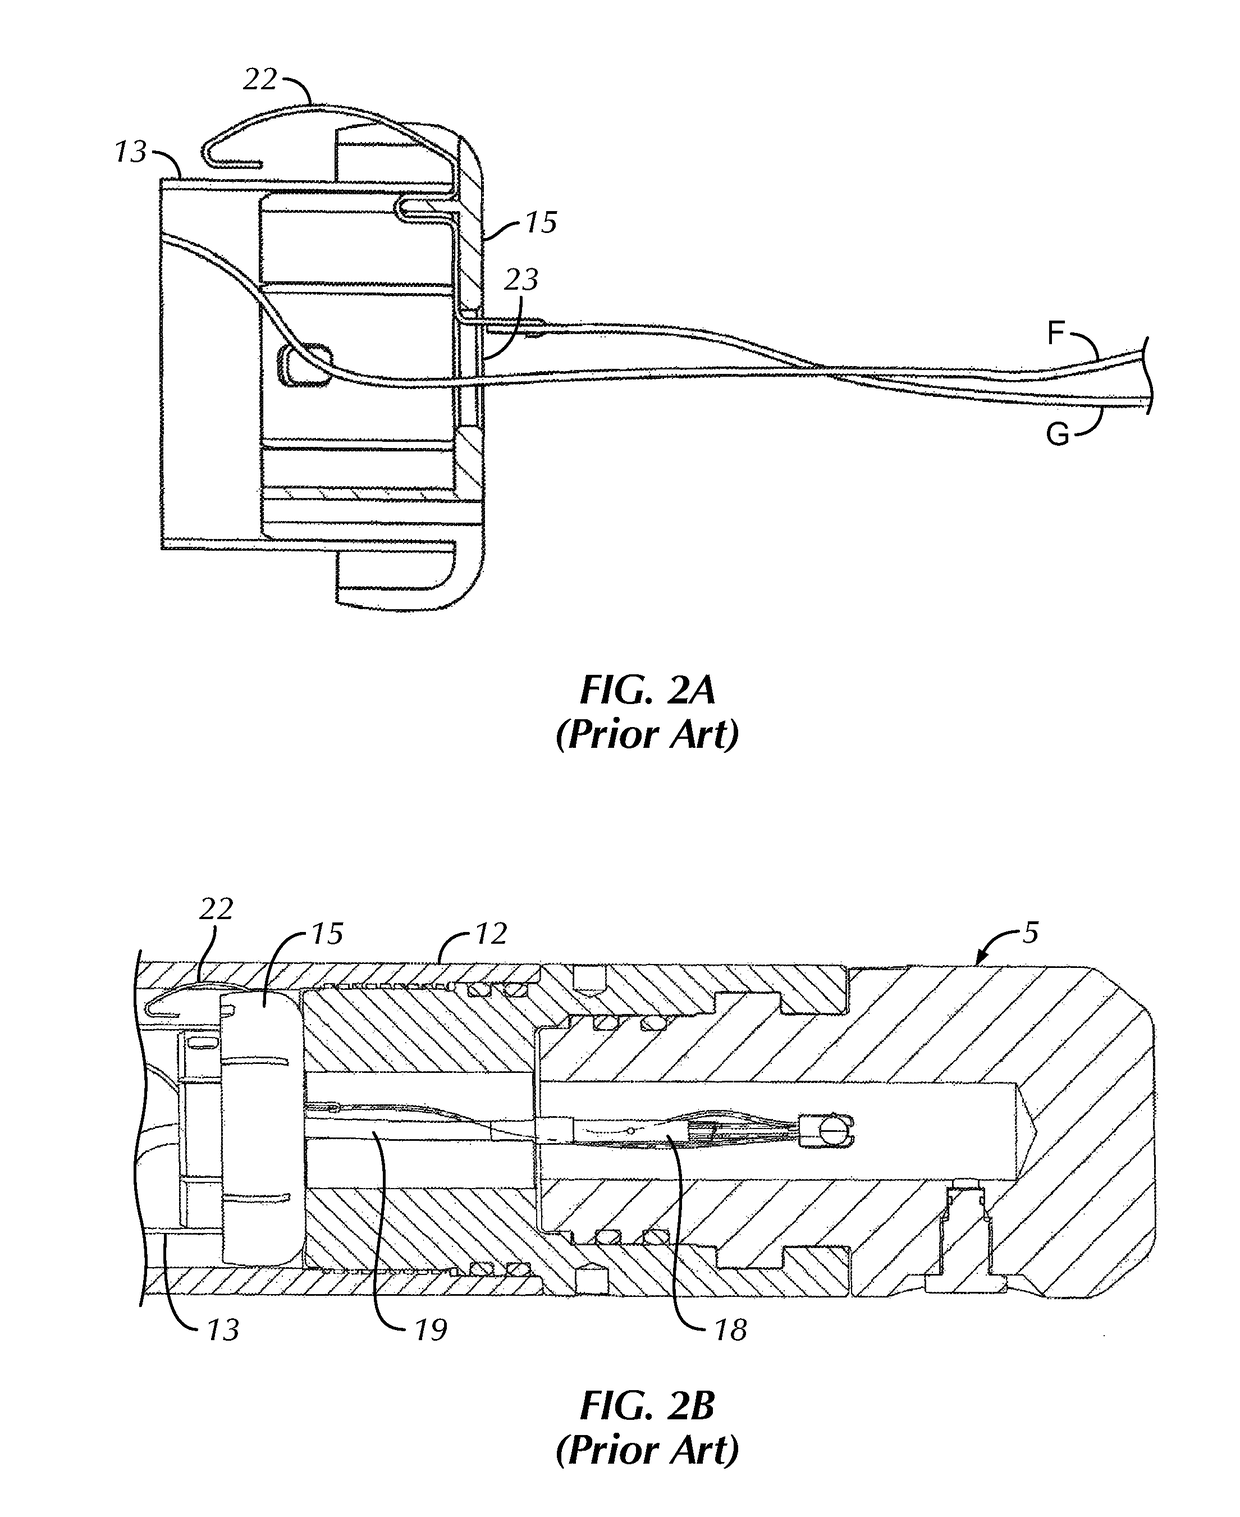 Apparatus for Electromechanically Connecting a Plurality of Guns for Well Perforation